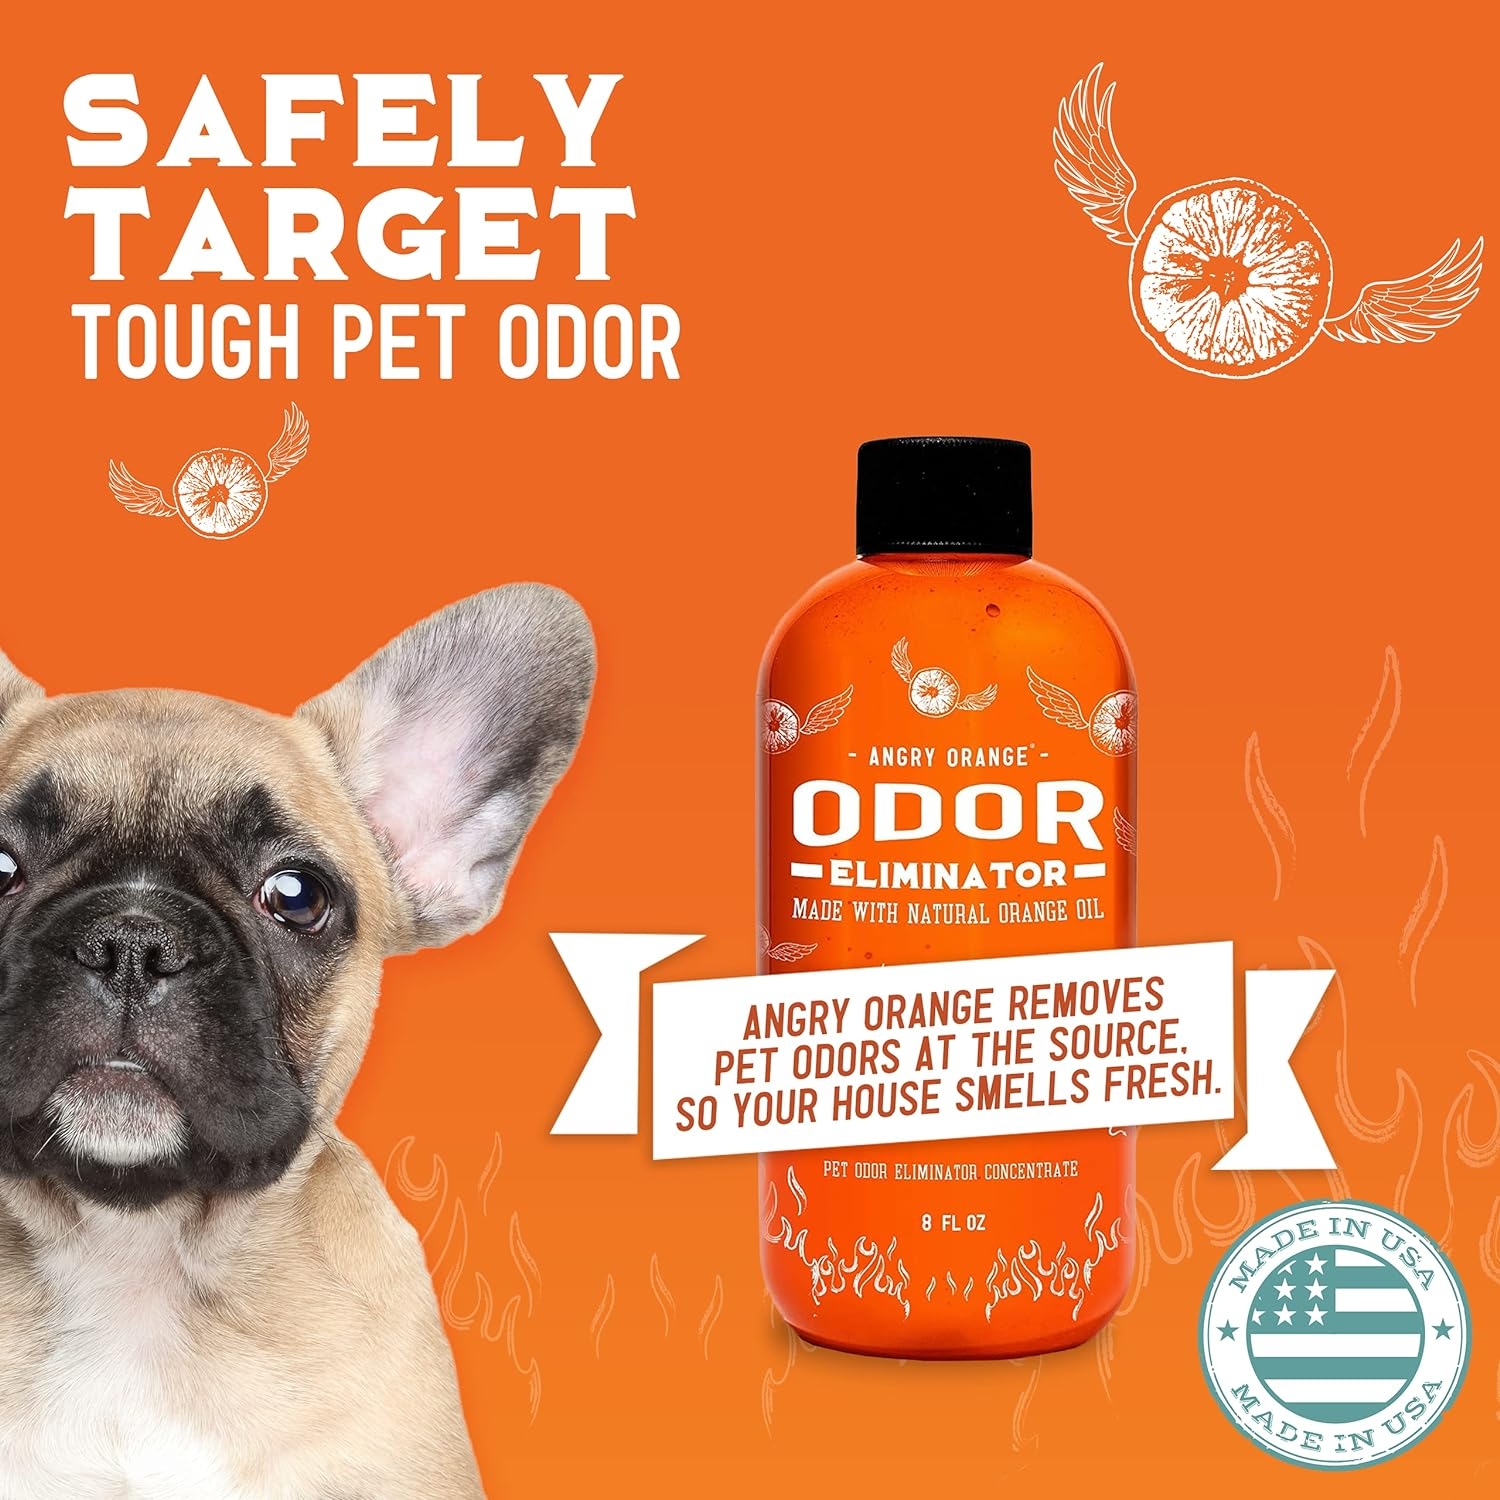 Angry Orange Pet Odor Eliminator for Dog and Cat Urine, Makes 1 Gallon of Solution for Carpet, Furniture and Floor Stains